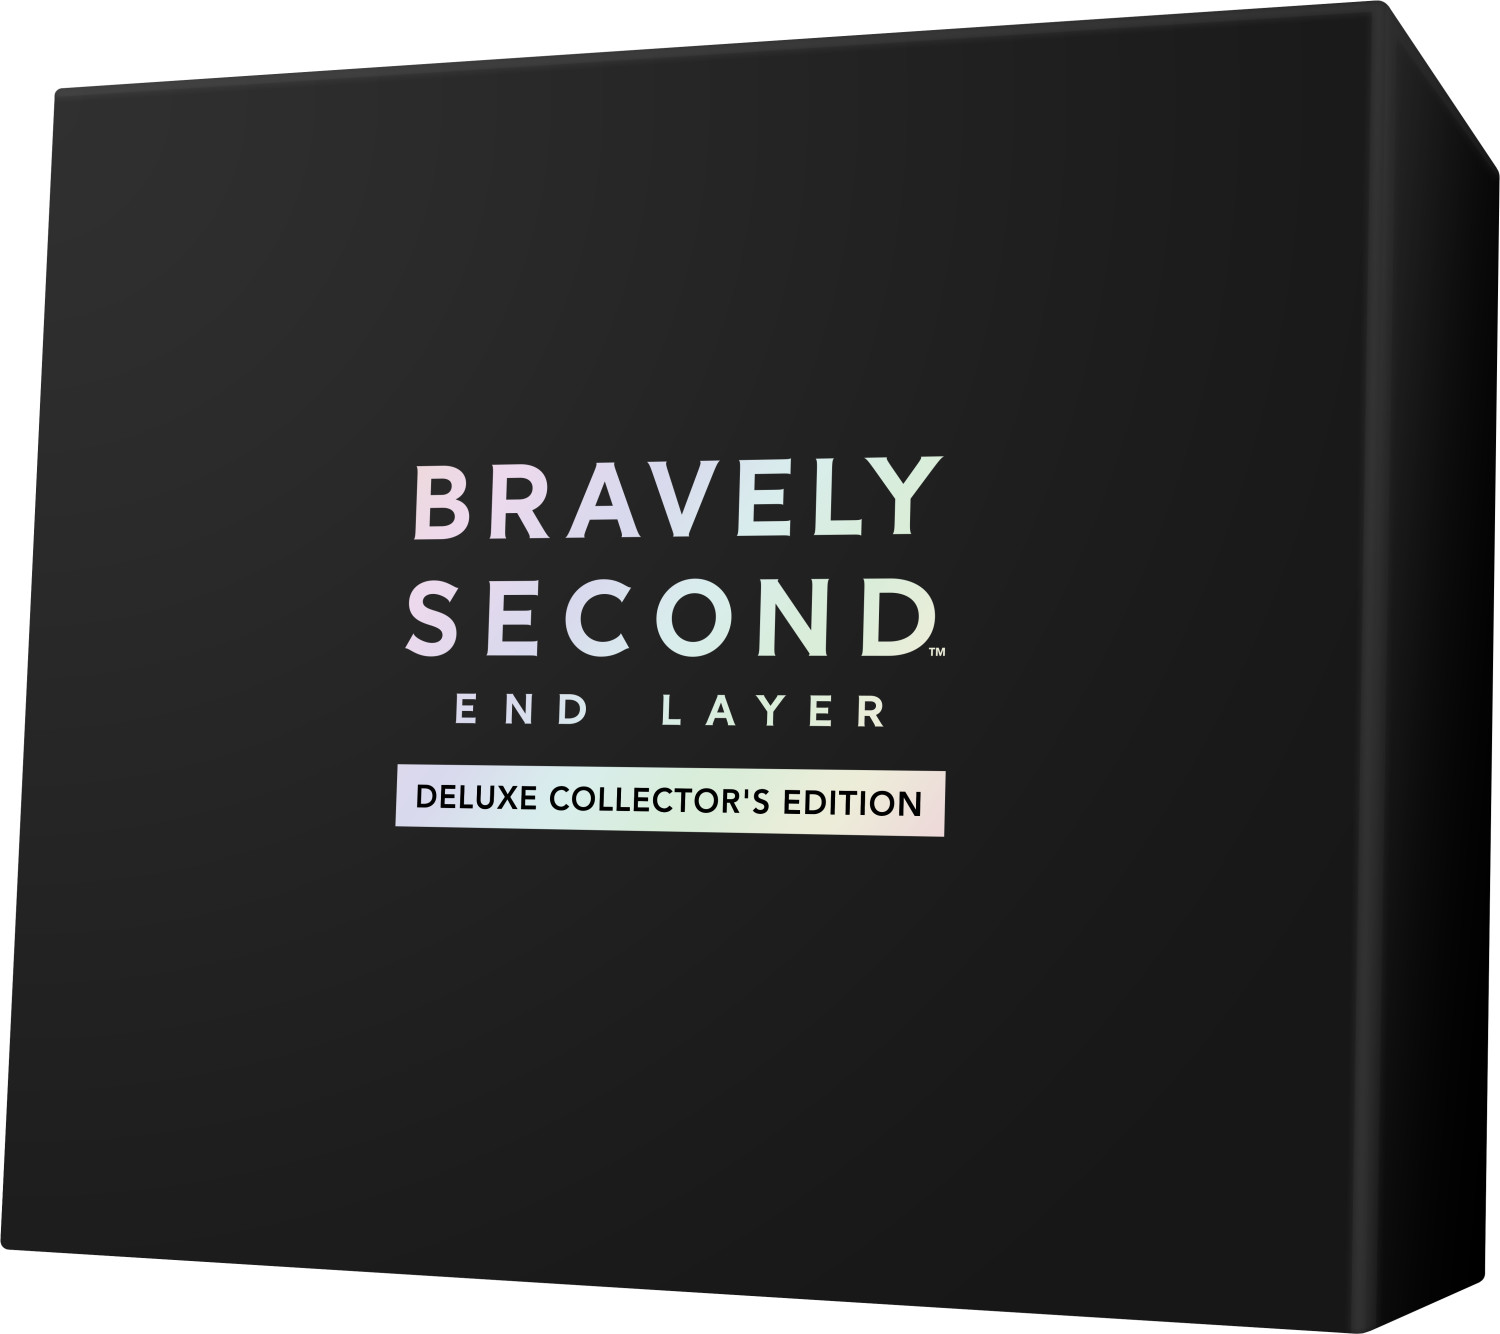 Photos - Game Square Enix Bravely Second: End Layer - Deluxe Collector's Edition (3DS)